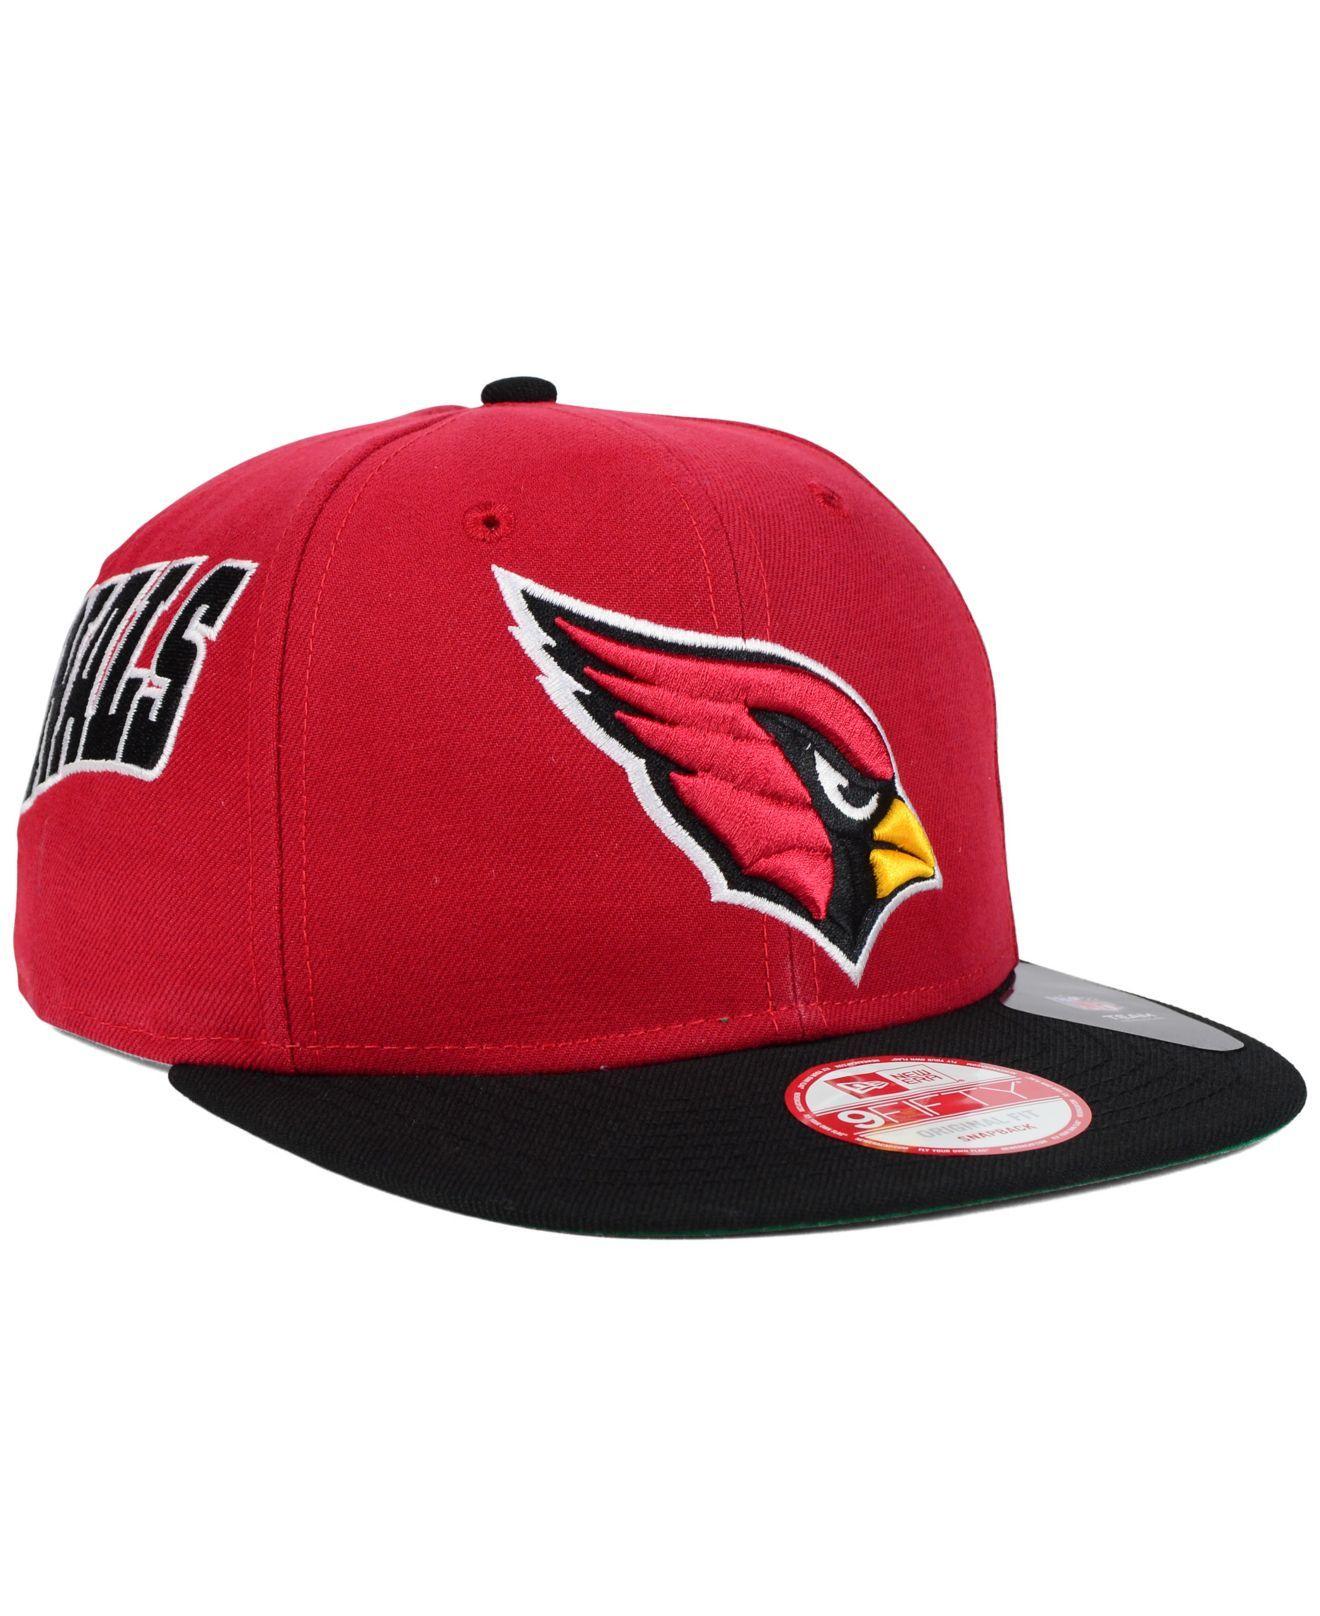 Red Swerve Logo - Lyst - Ktz Arizona Cardinals Swerve 9fifty Snapback Cap in Red for Men